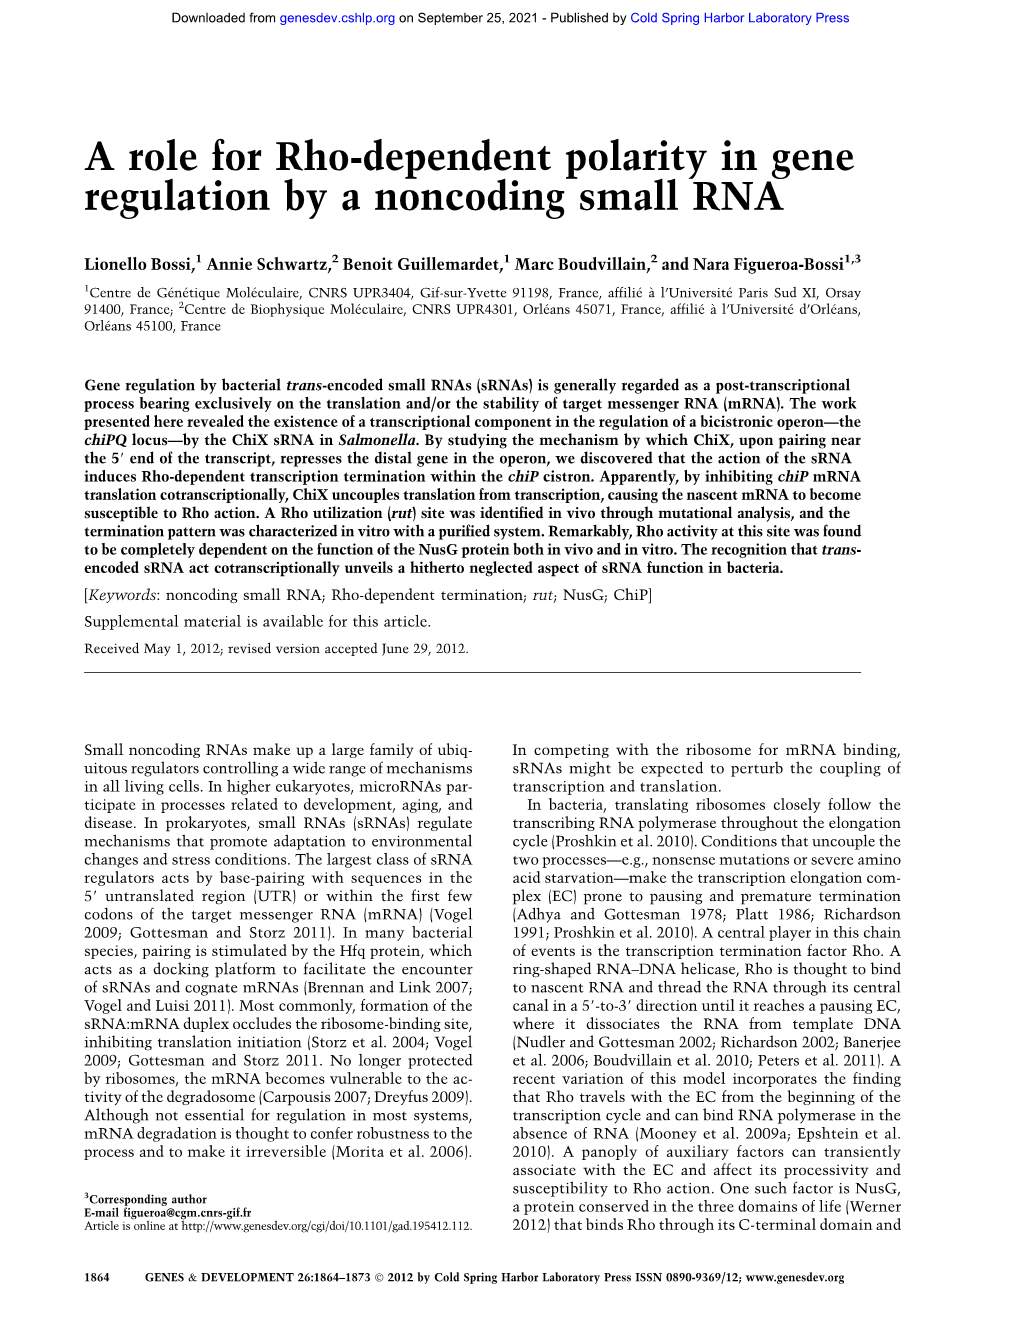 A Role for Rho-Dependent Polarity in Gene Regulation by a Noncoding Small RNA